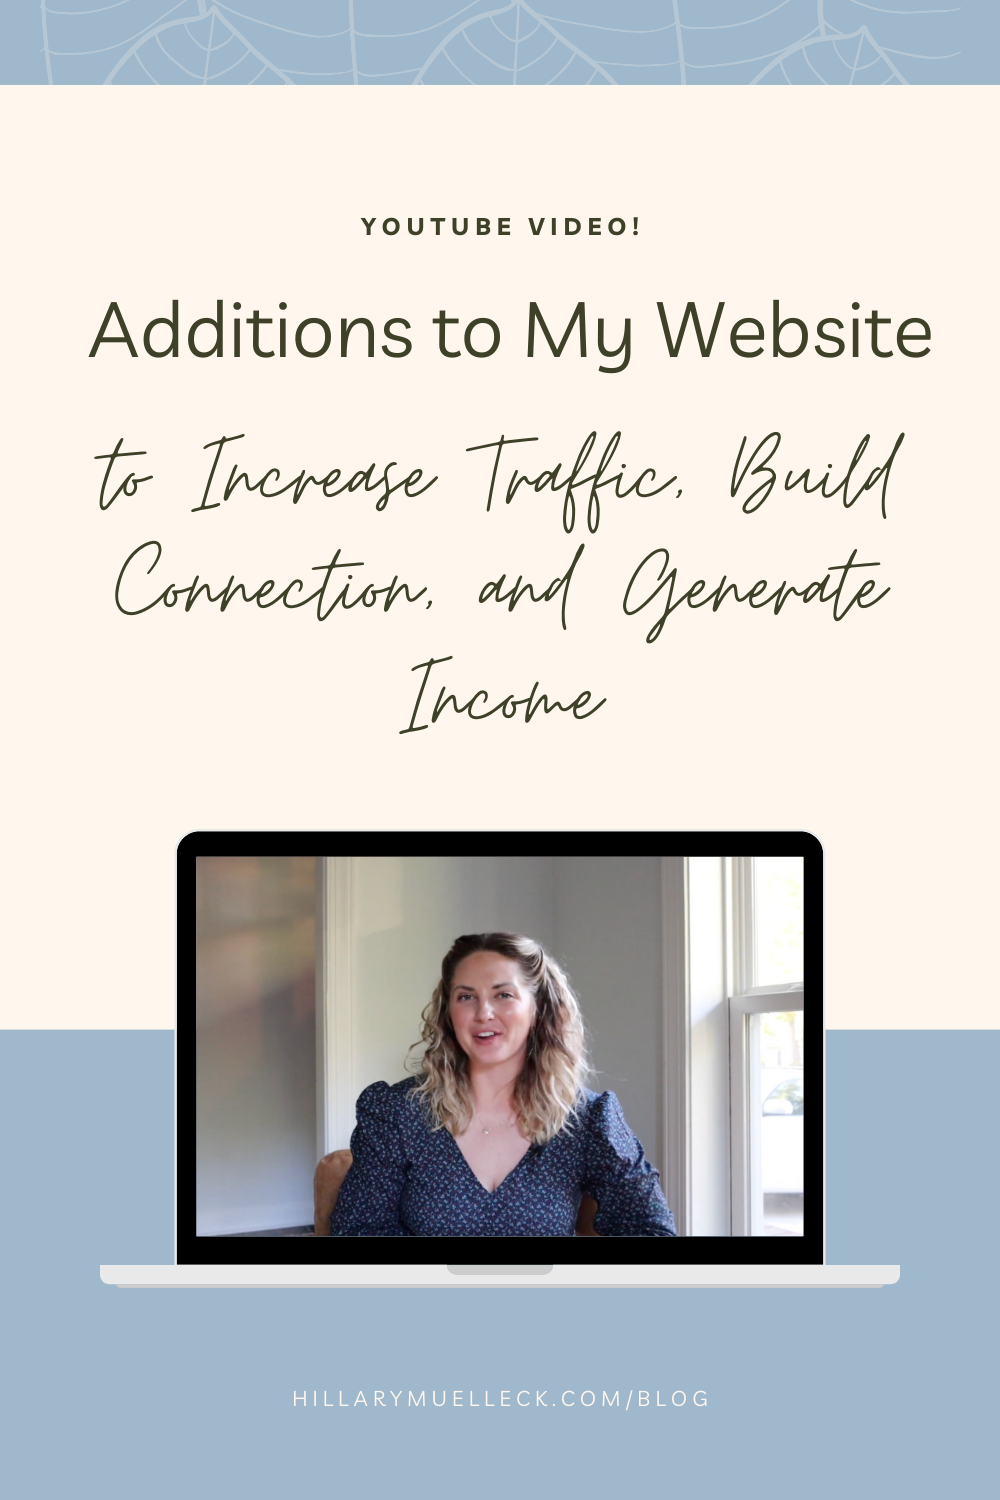 Photographer Hillary Muelleck shares her new favorite website features to build connection, increase traffic and generate income